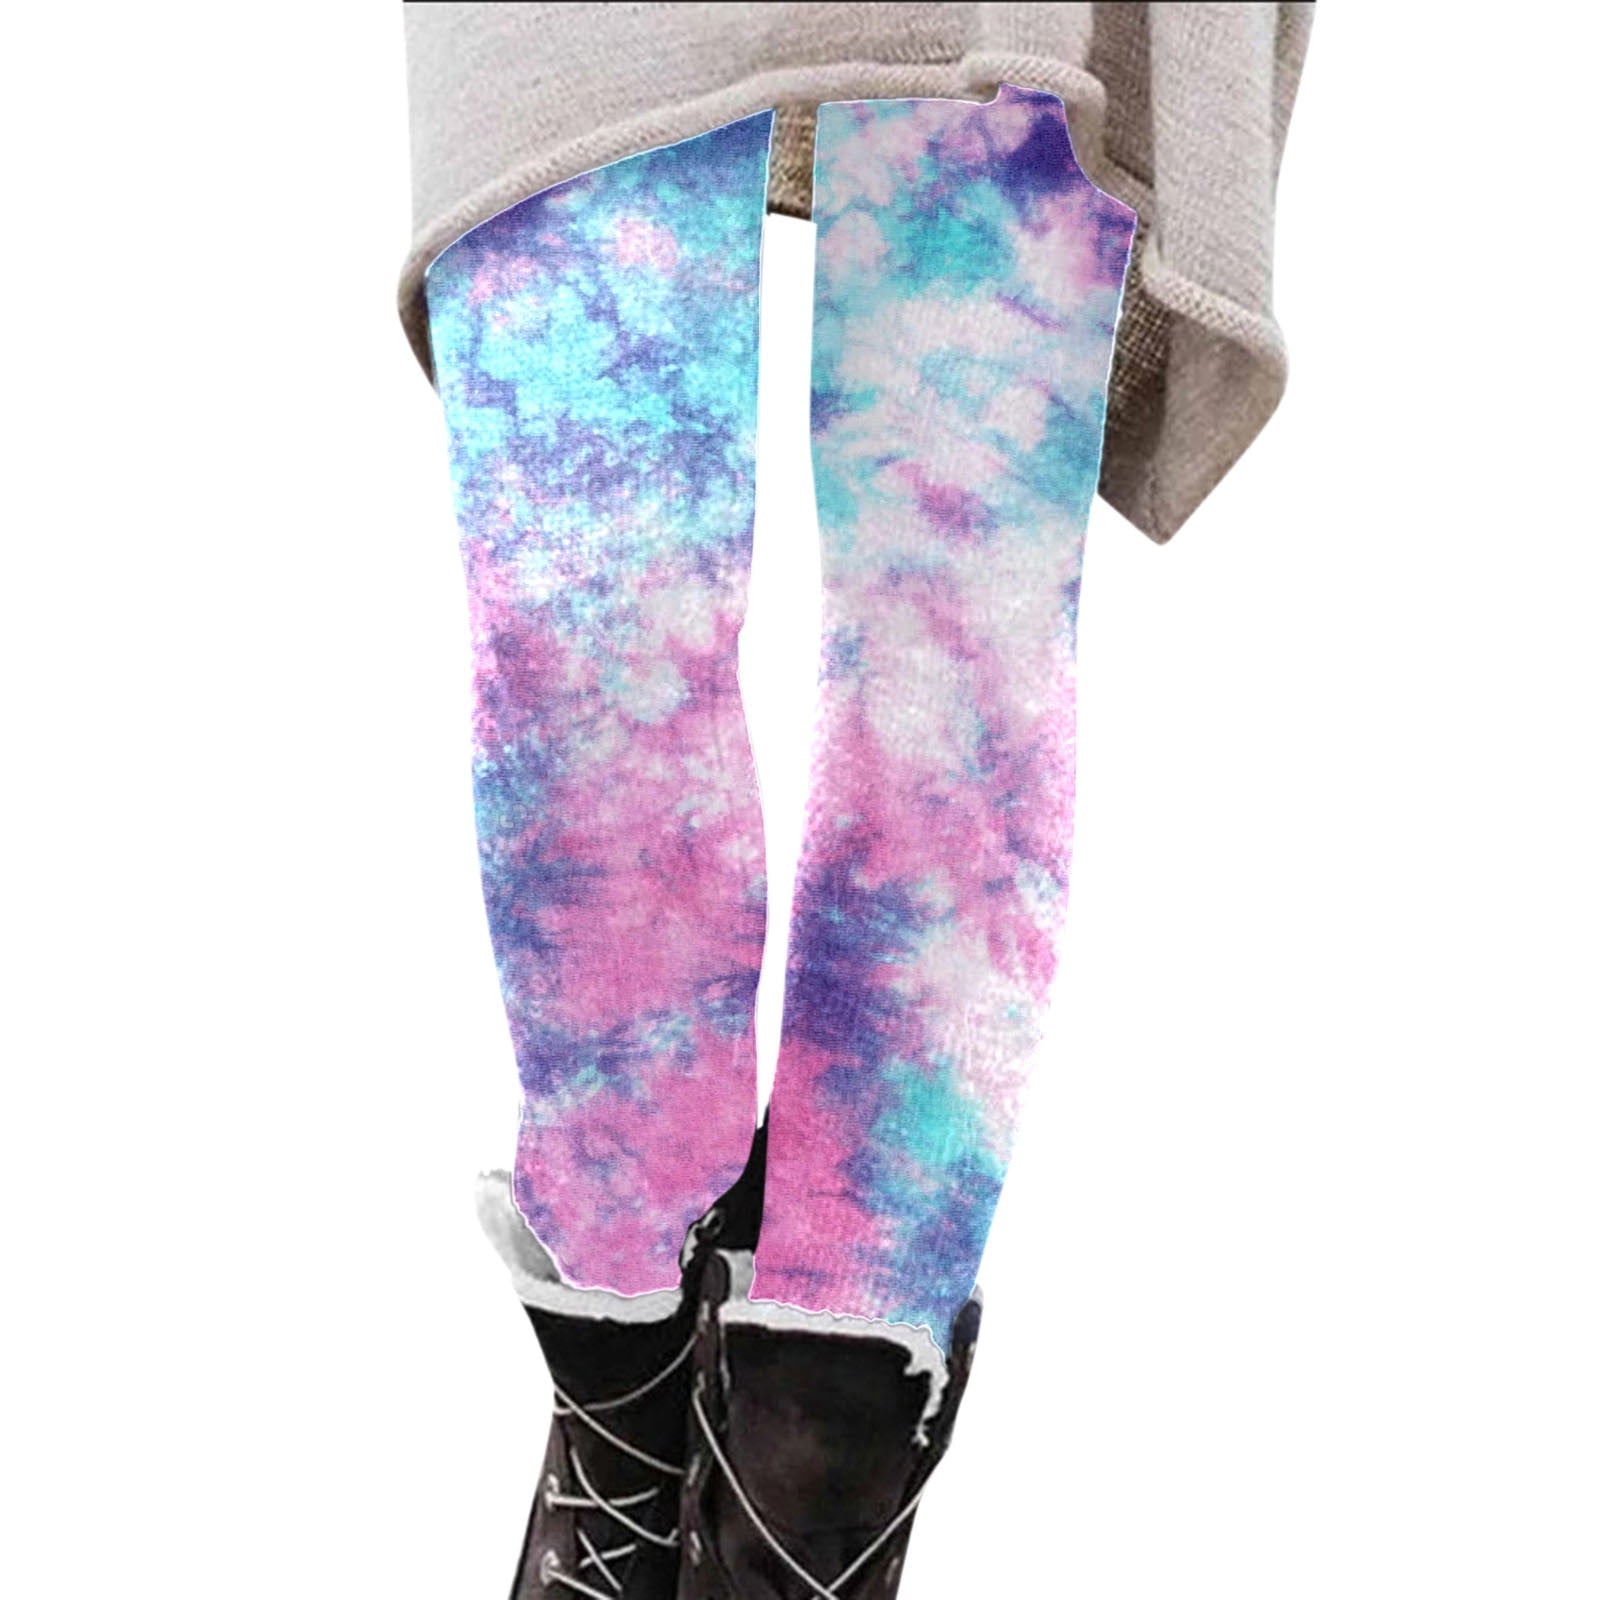 JDEFEG Soft Leggings For Women Women Autumn And Winter Colorful Tie Dye  Waist Leggings Business Casual Pants For Women Plus Polyester O M 